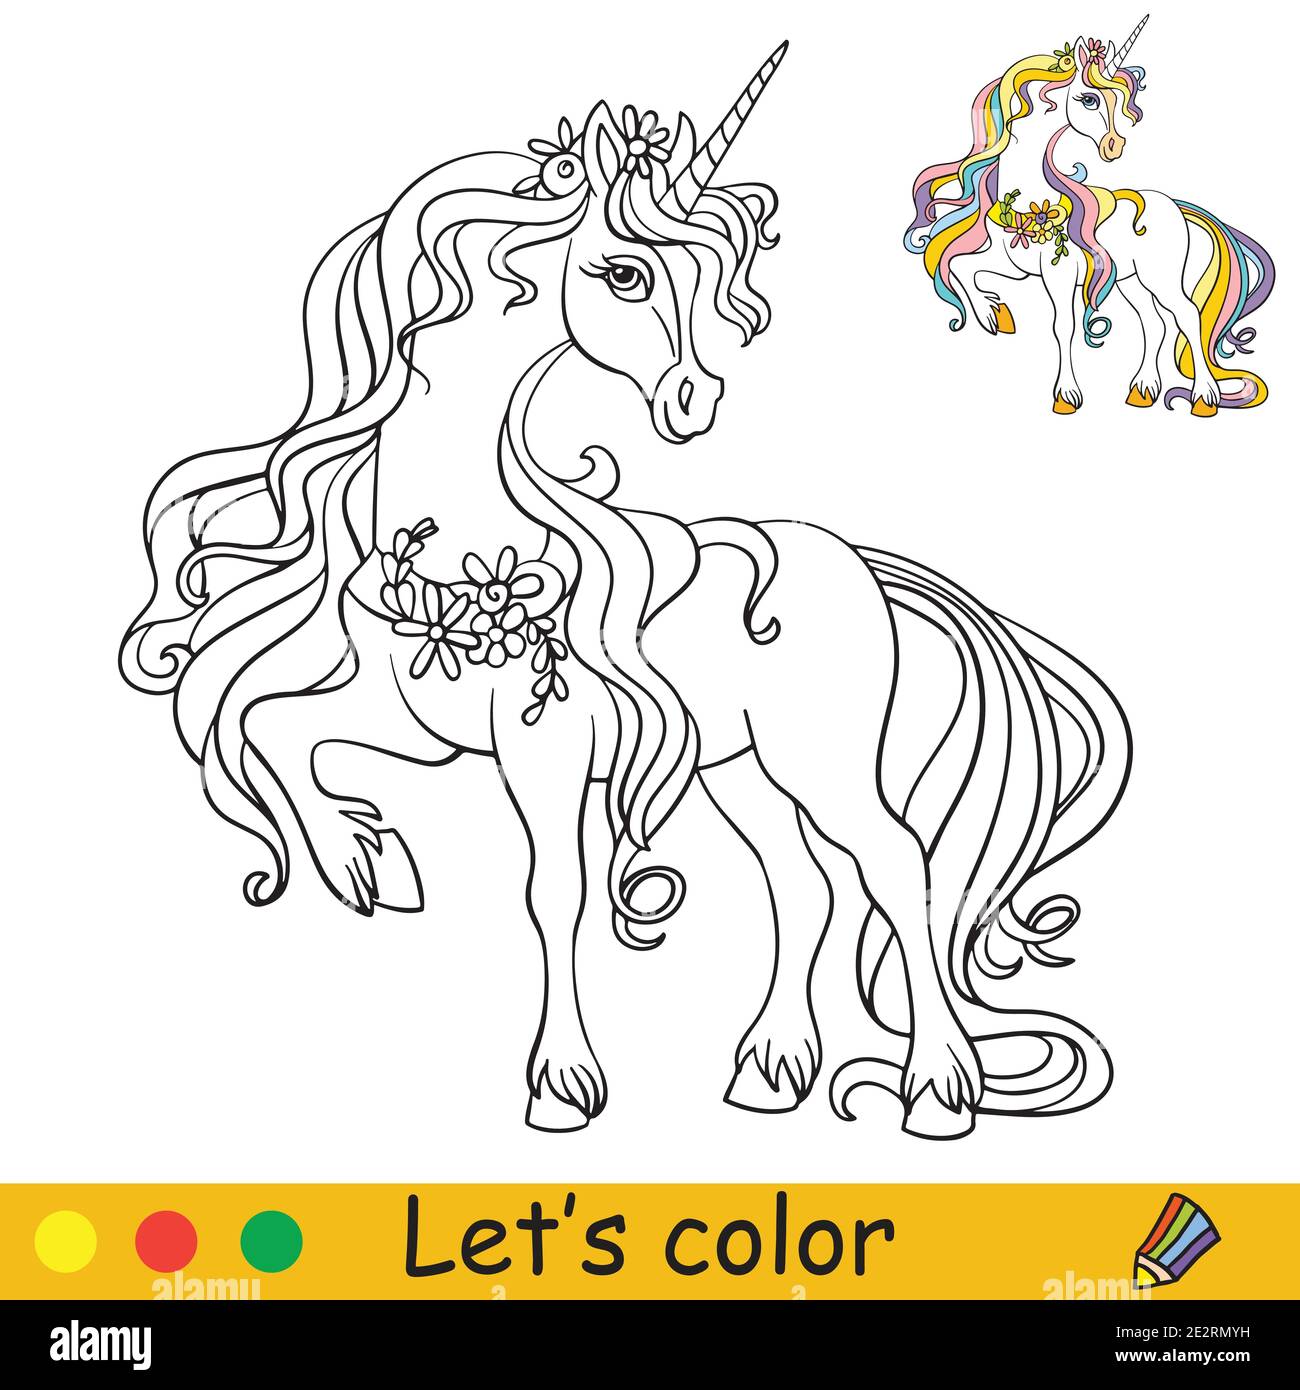 Cute elegant unicorn with flowers. Coloring book page with ...